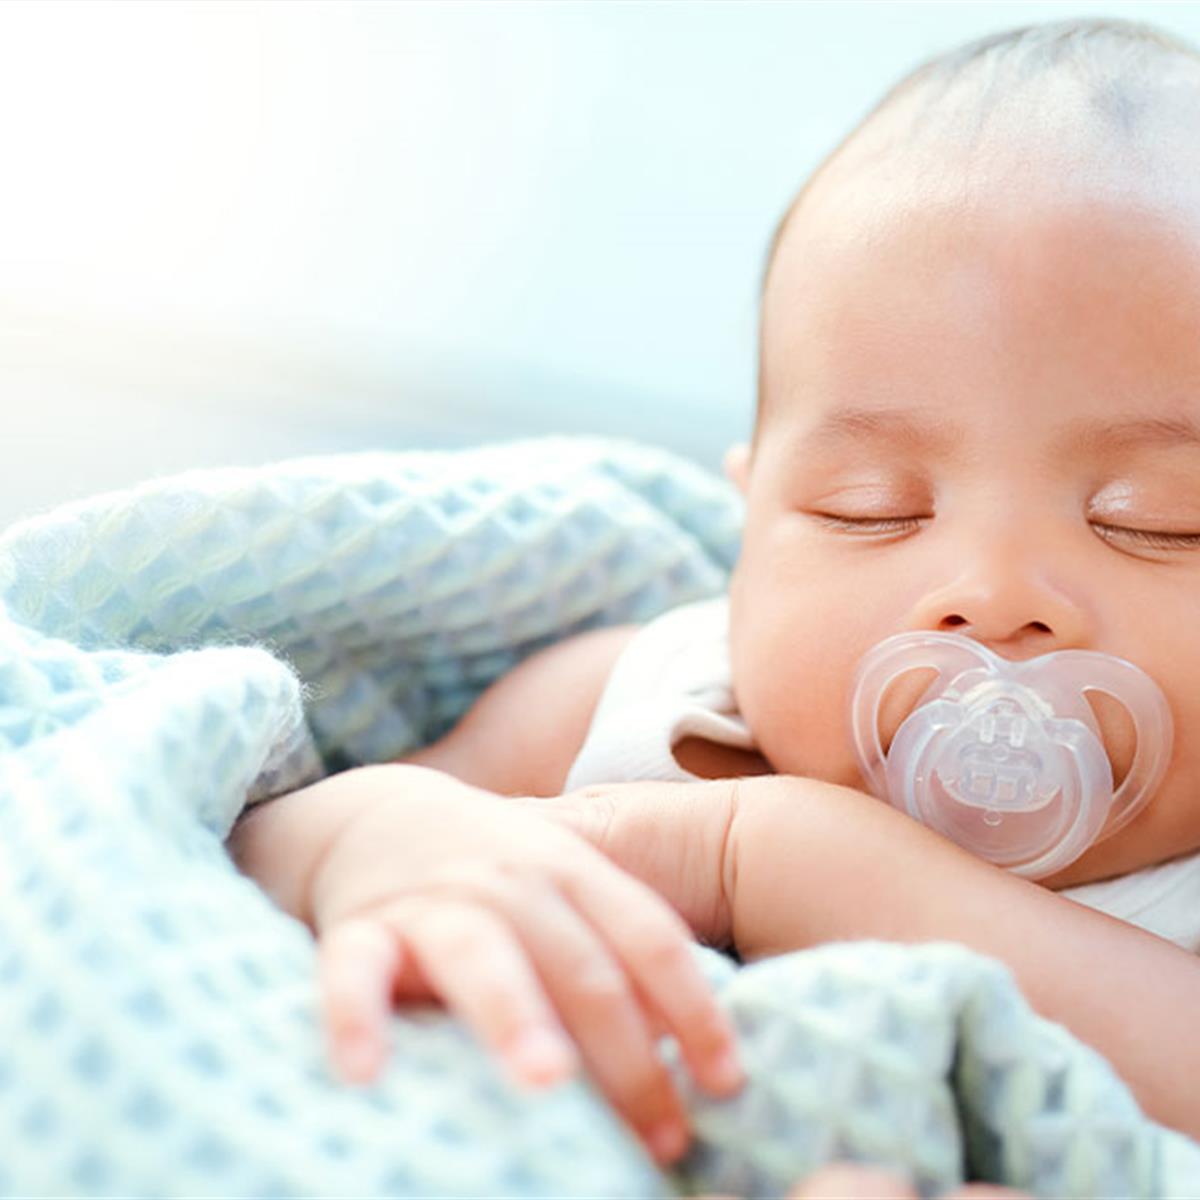 Giving Your Newborn A Pacifier: Sleep, Safety, When To Use, More